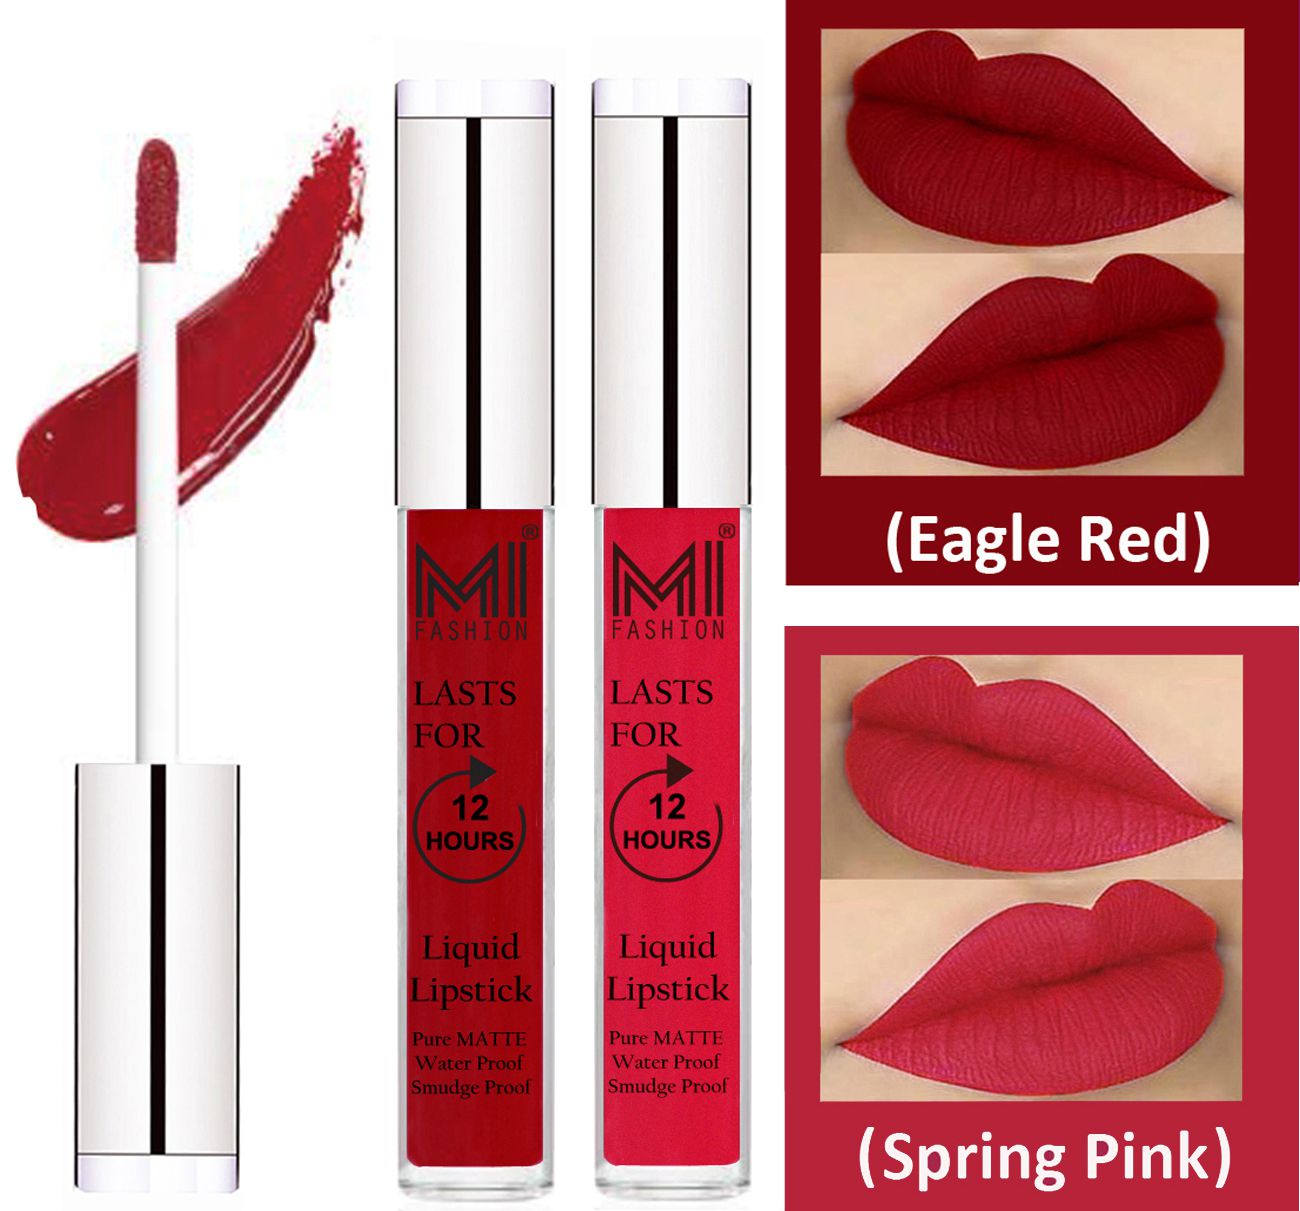     			 MI FASHION Liquid Lipstick (Shade - Eagle Red,Spring Pink) | Pack of 2